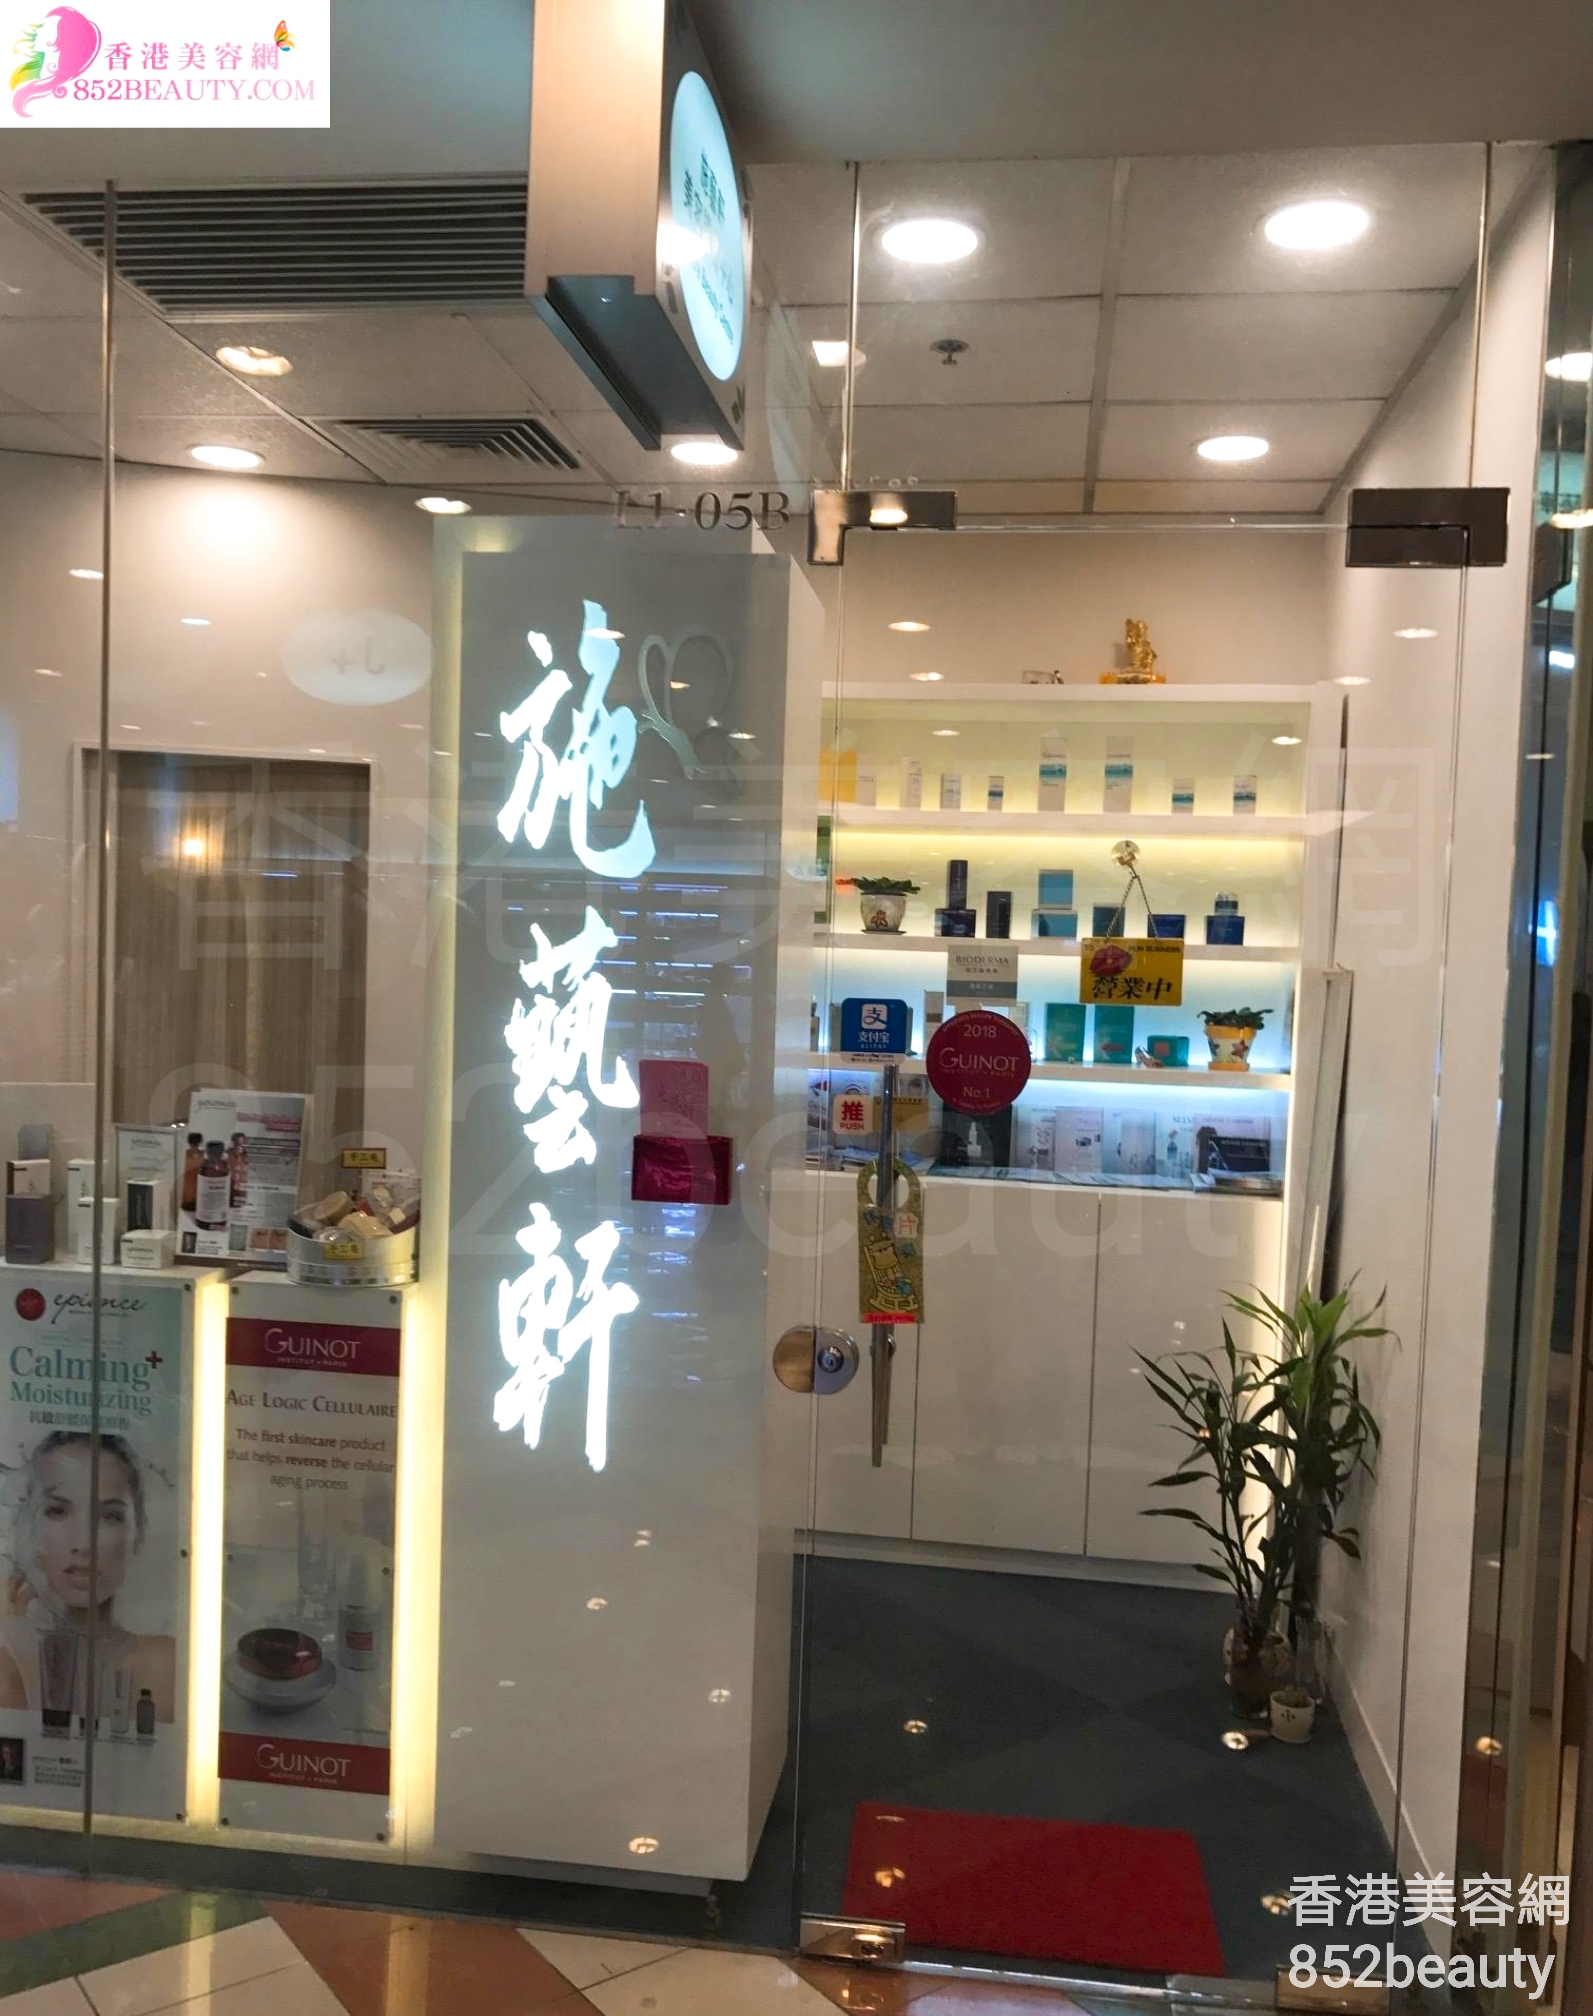 Hand and foot care: 施藝軒